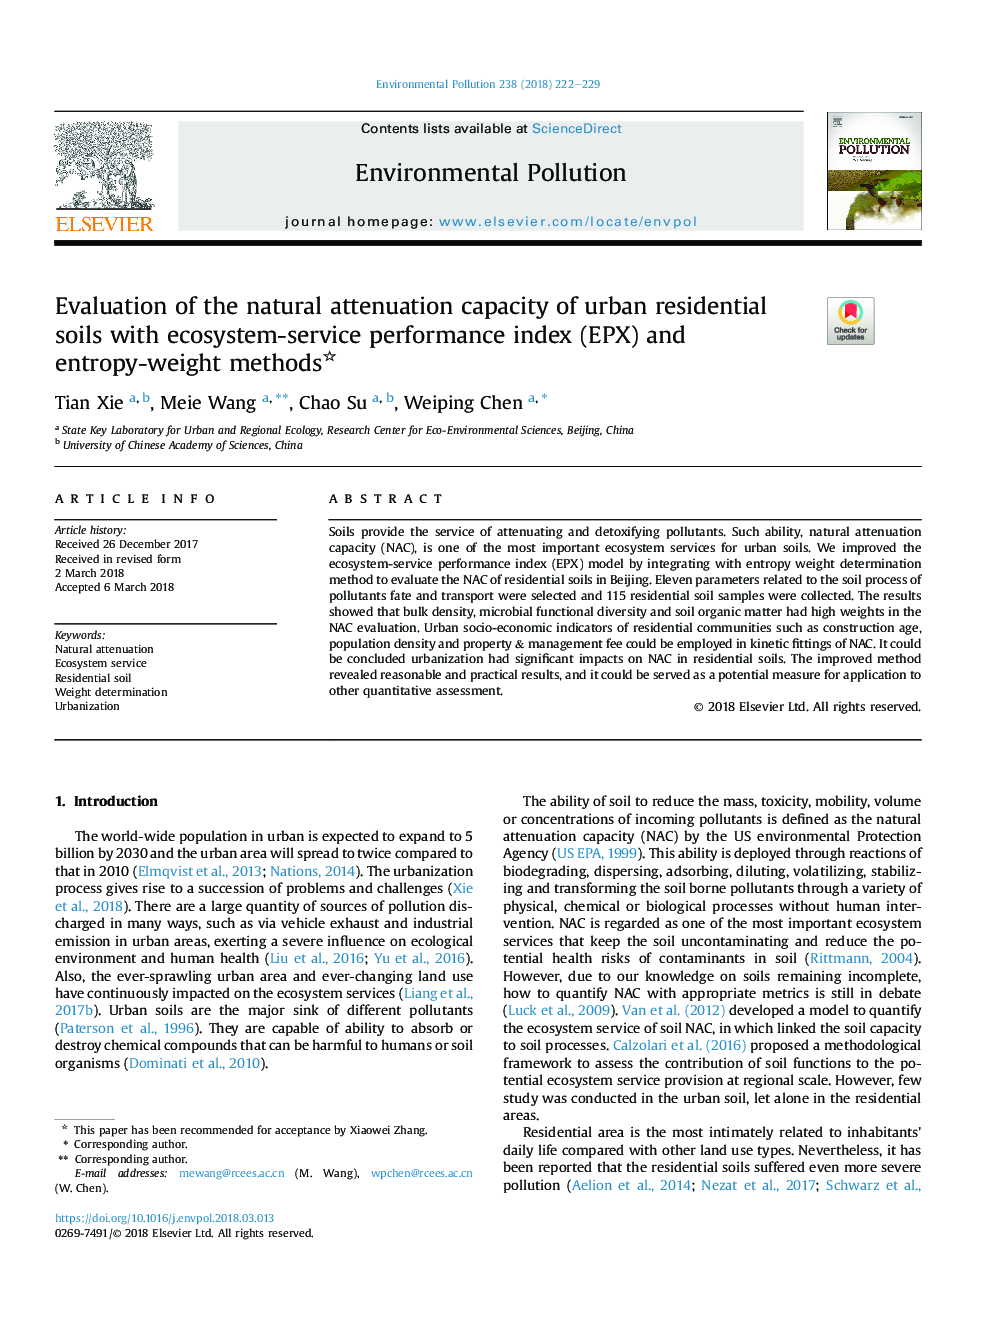 Evaluation of the natural attenuation capacity of urban residential soils with ecosystem-service performance index (EPX) and entropy-weight methods